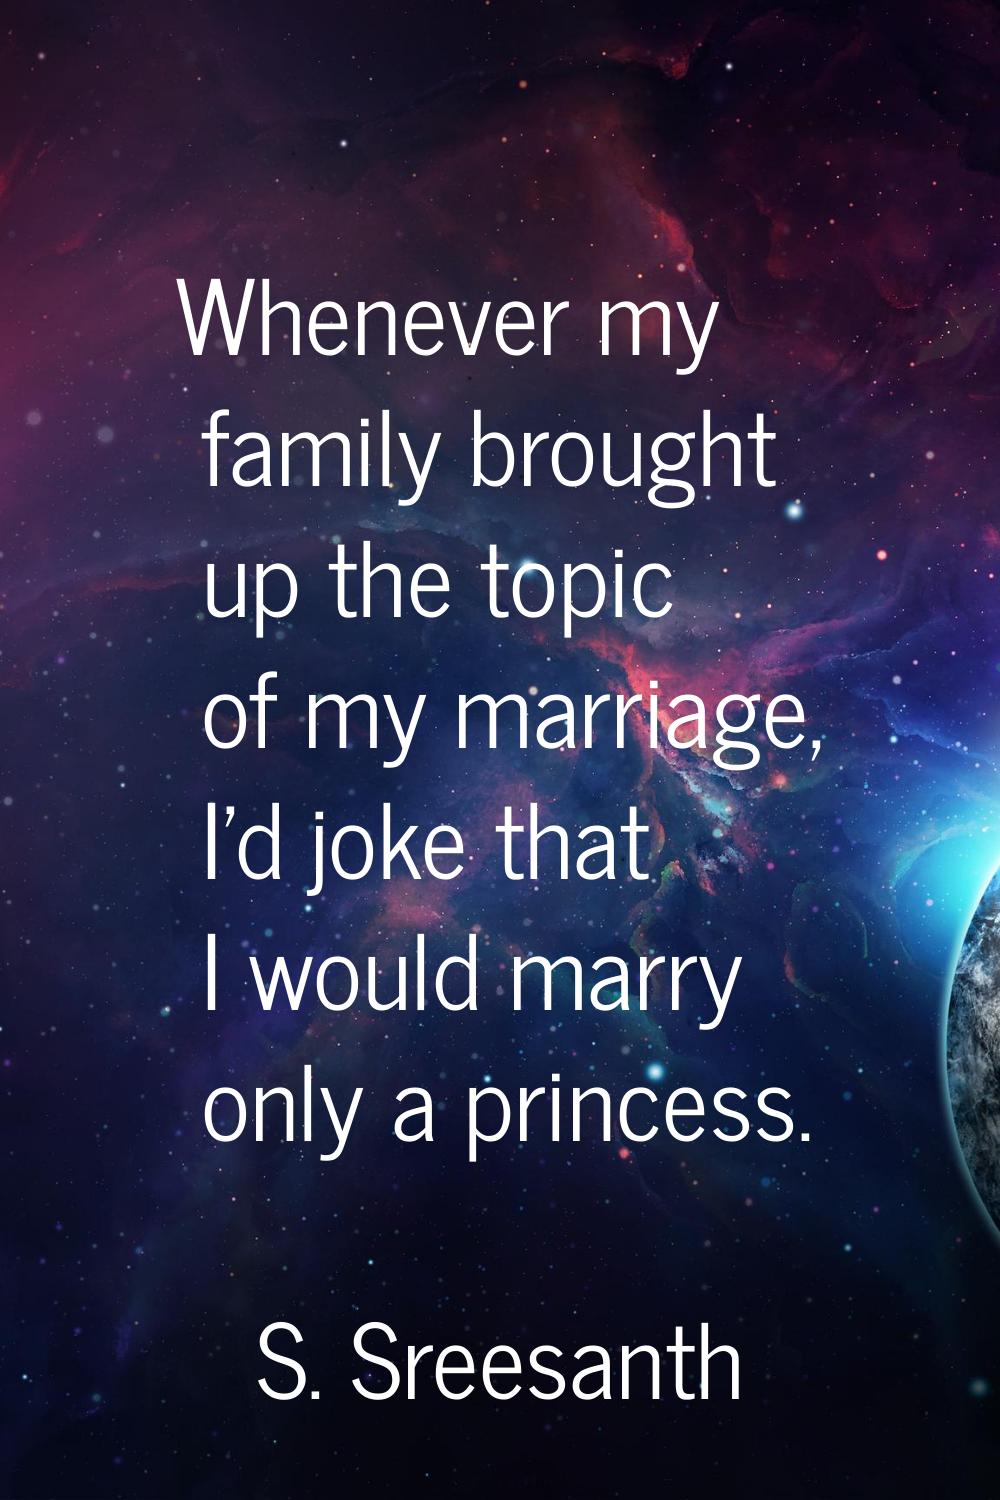 Whenever my family brought up the topic of my marriage, I'd joke that I would marry only a princess